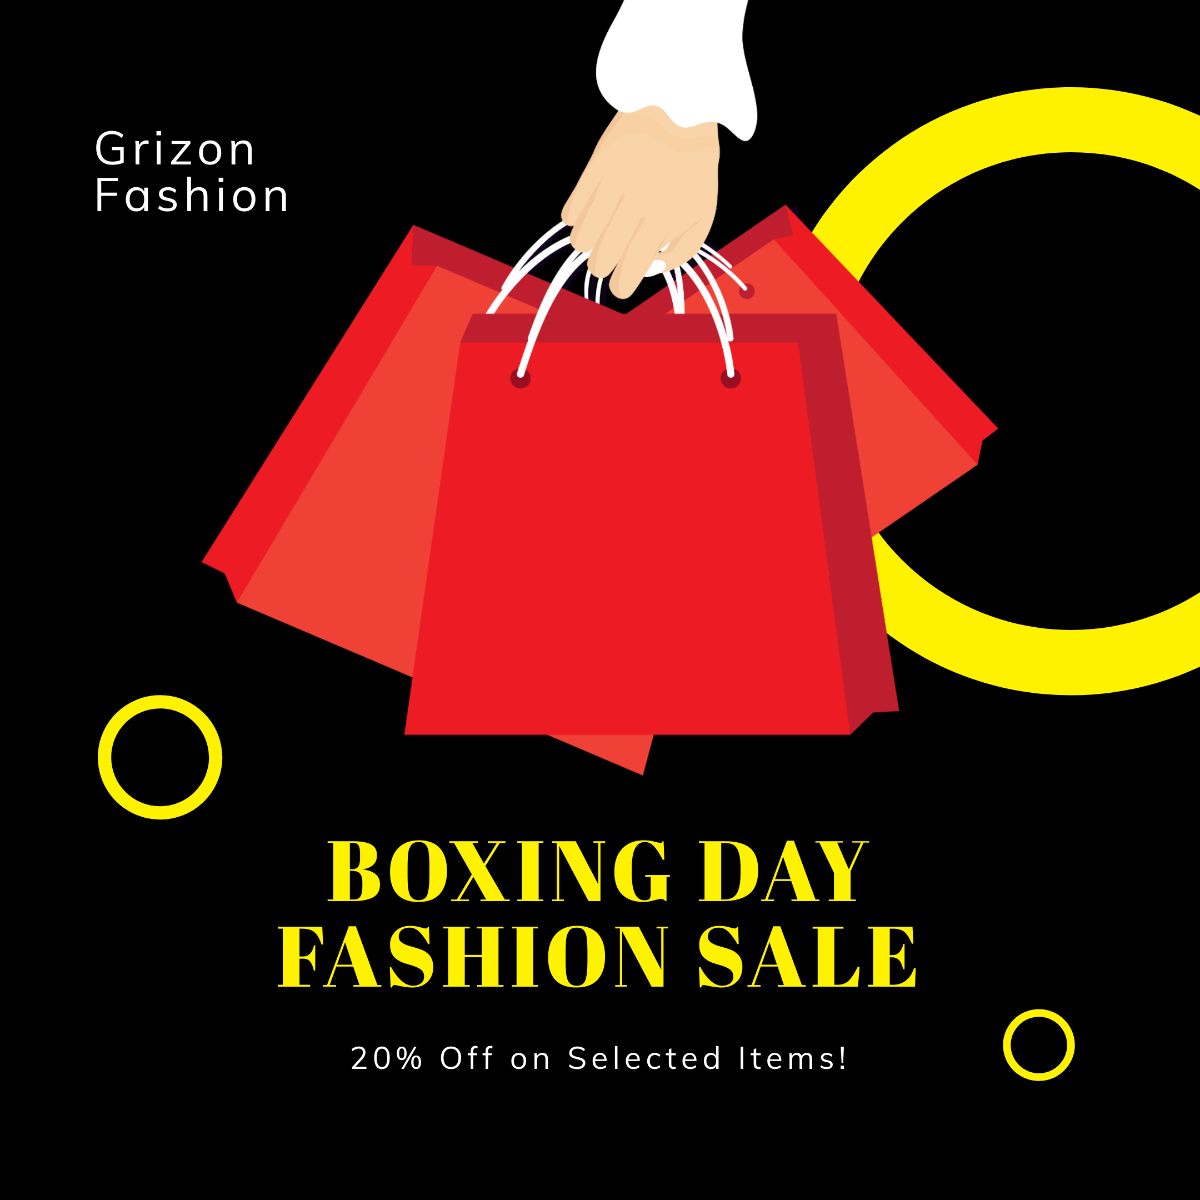 Boxing Day Fashion Sale Instagram Post Template